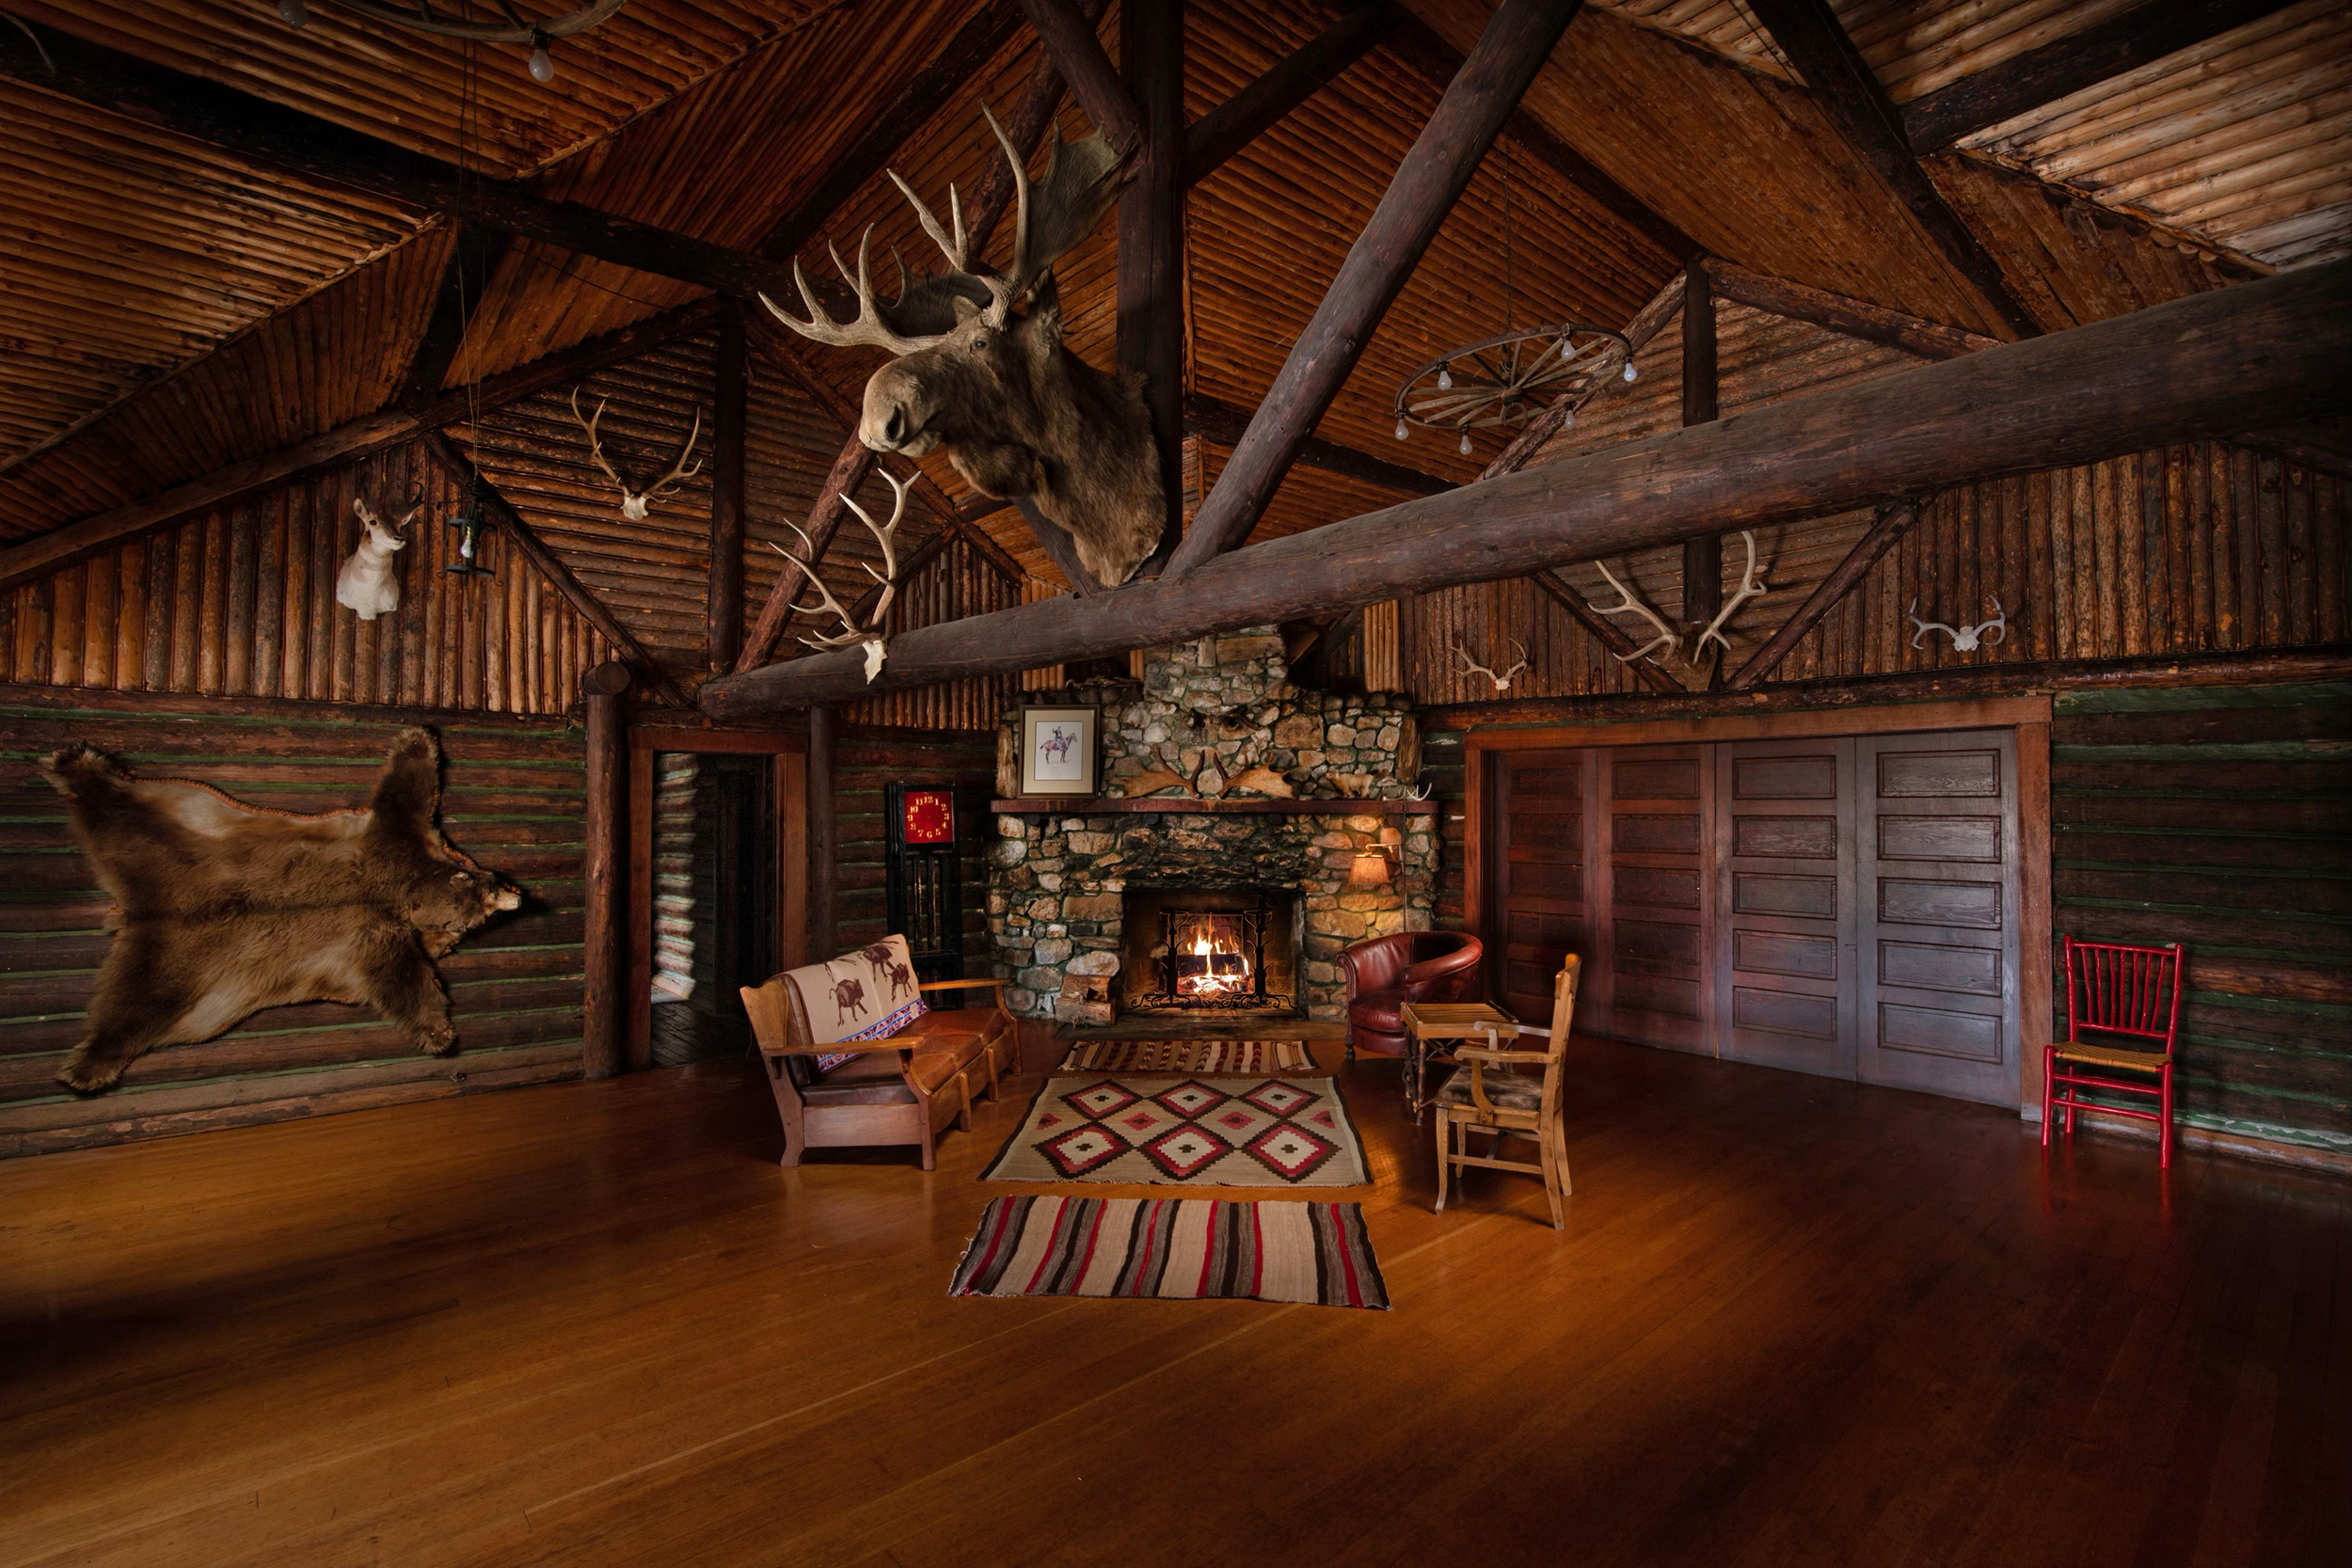 The historic OTO lodge set up for dude ranch guests for a Pop-Up Ranch event.